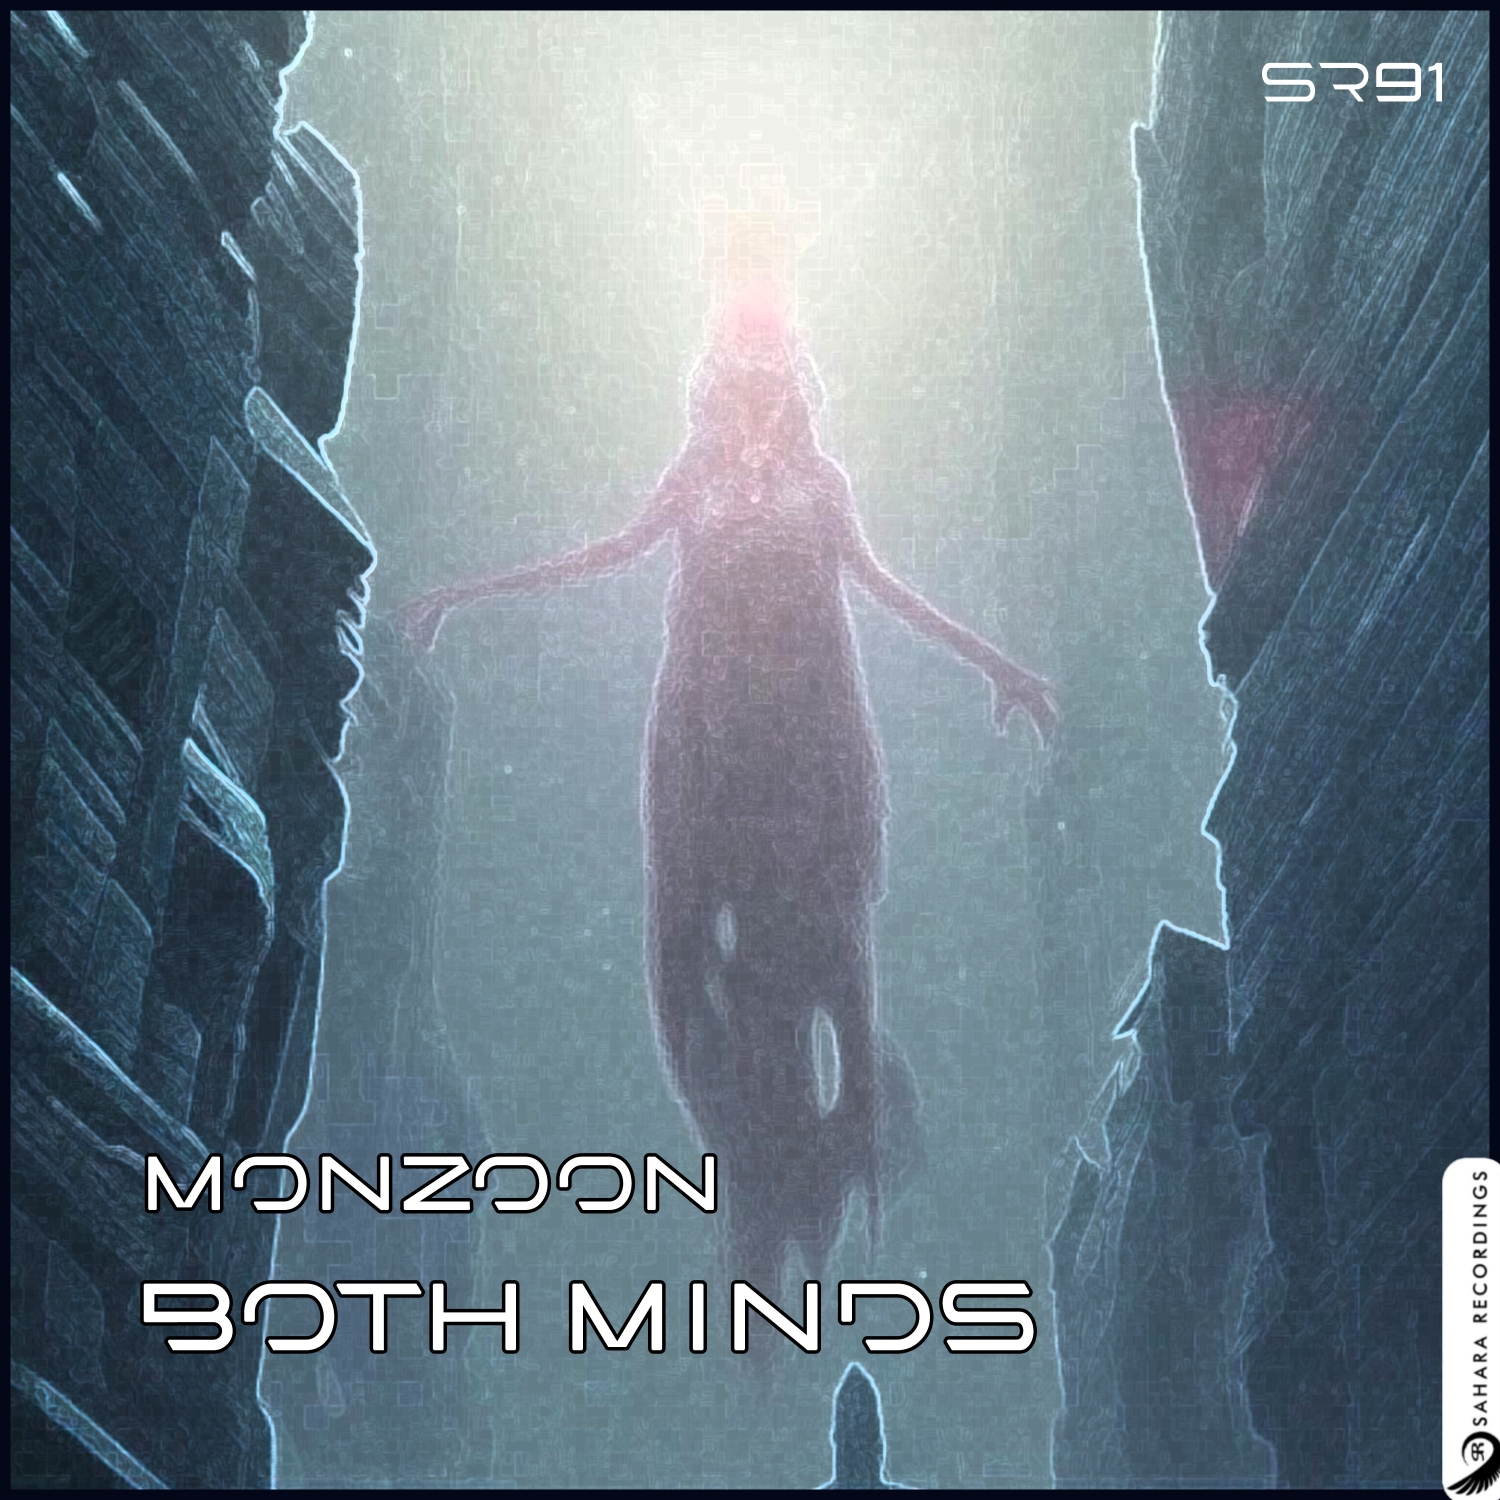 Monzoon presents Both Minds on Sahara Recordings